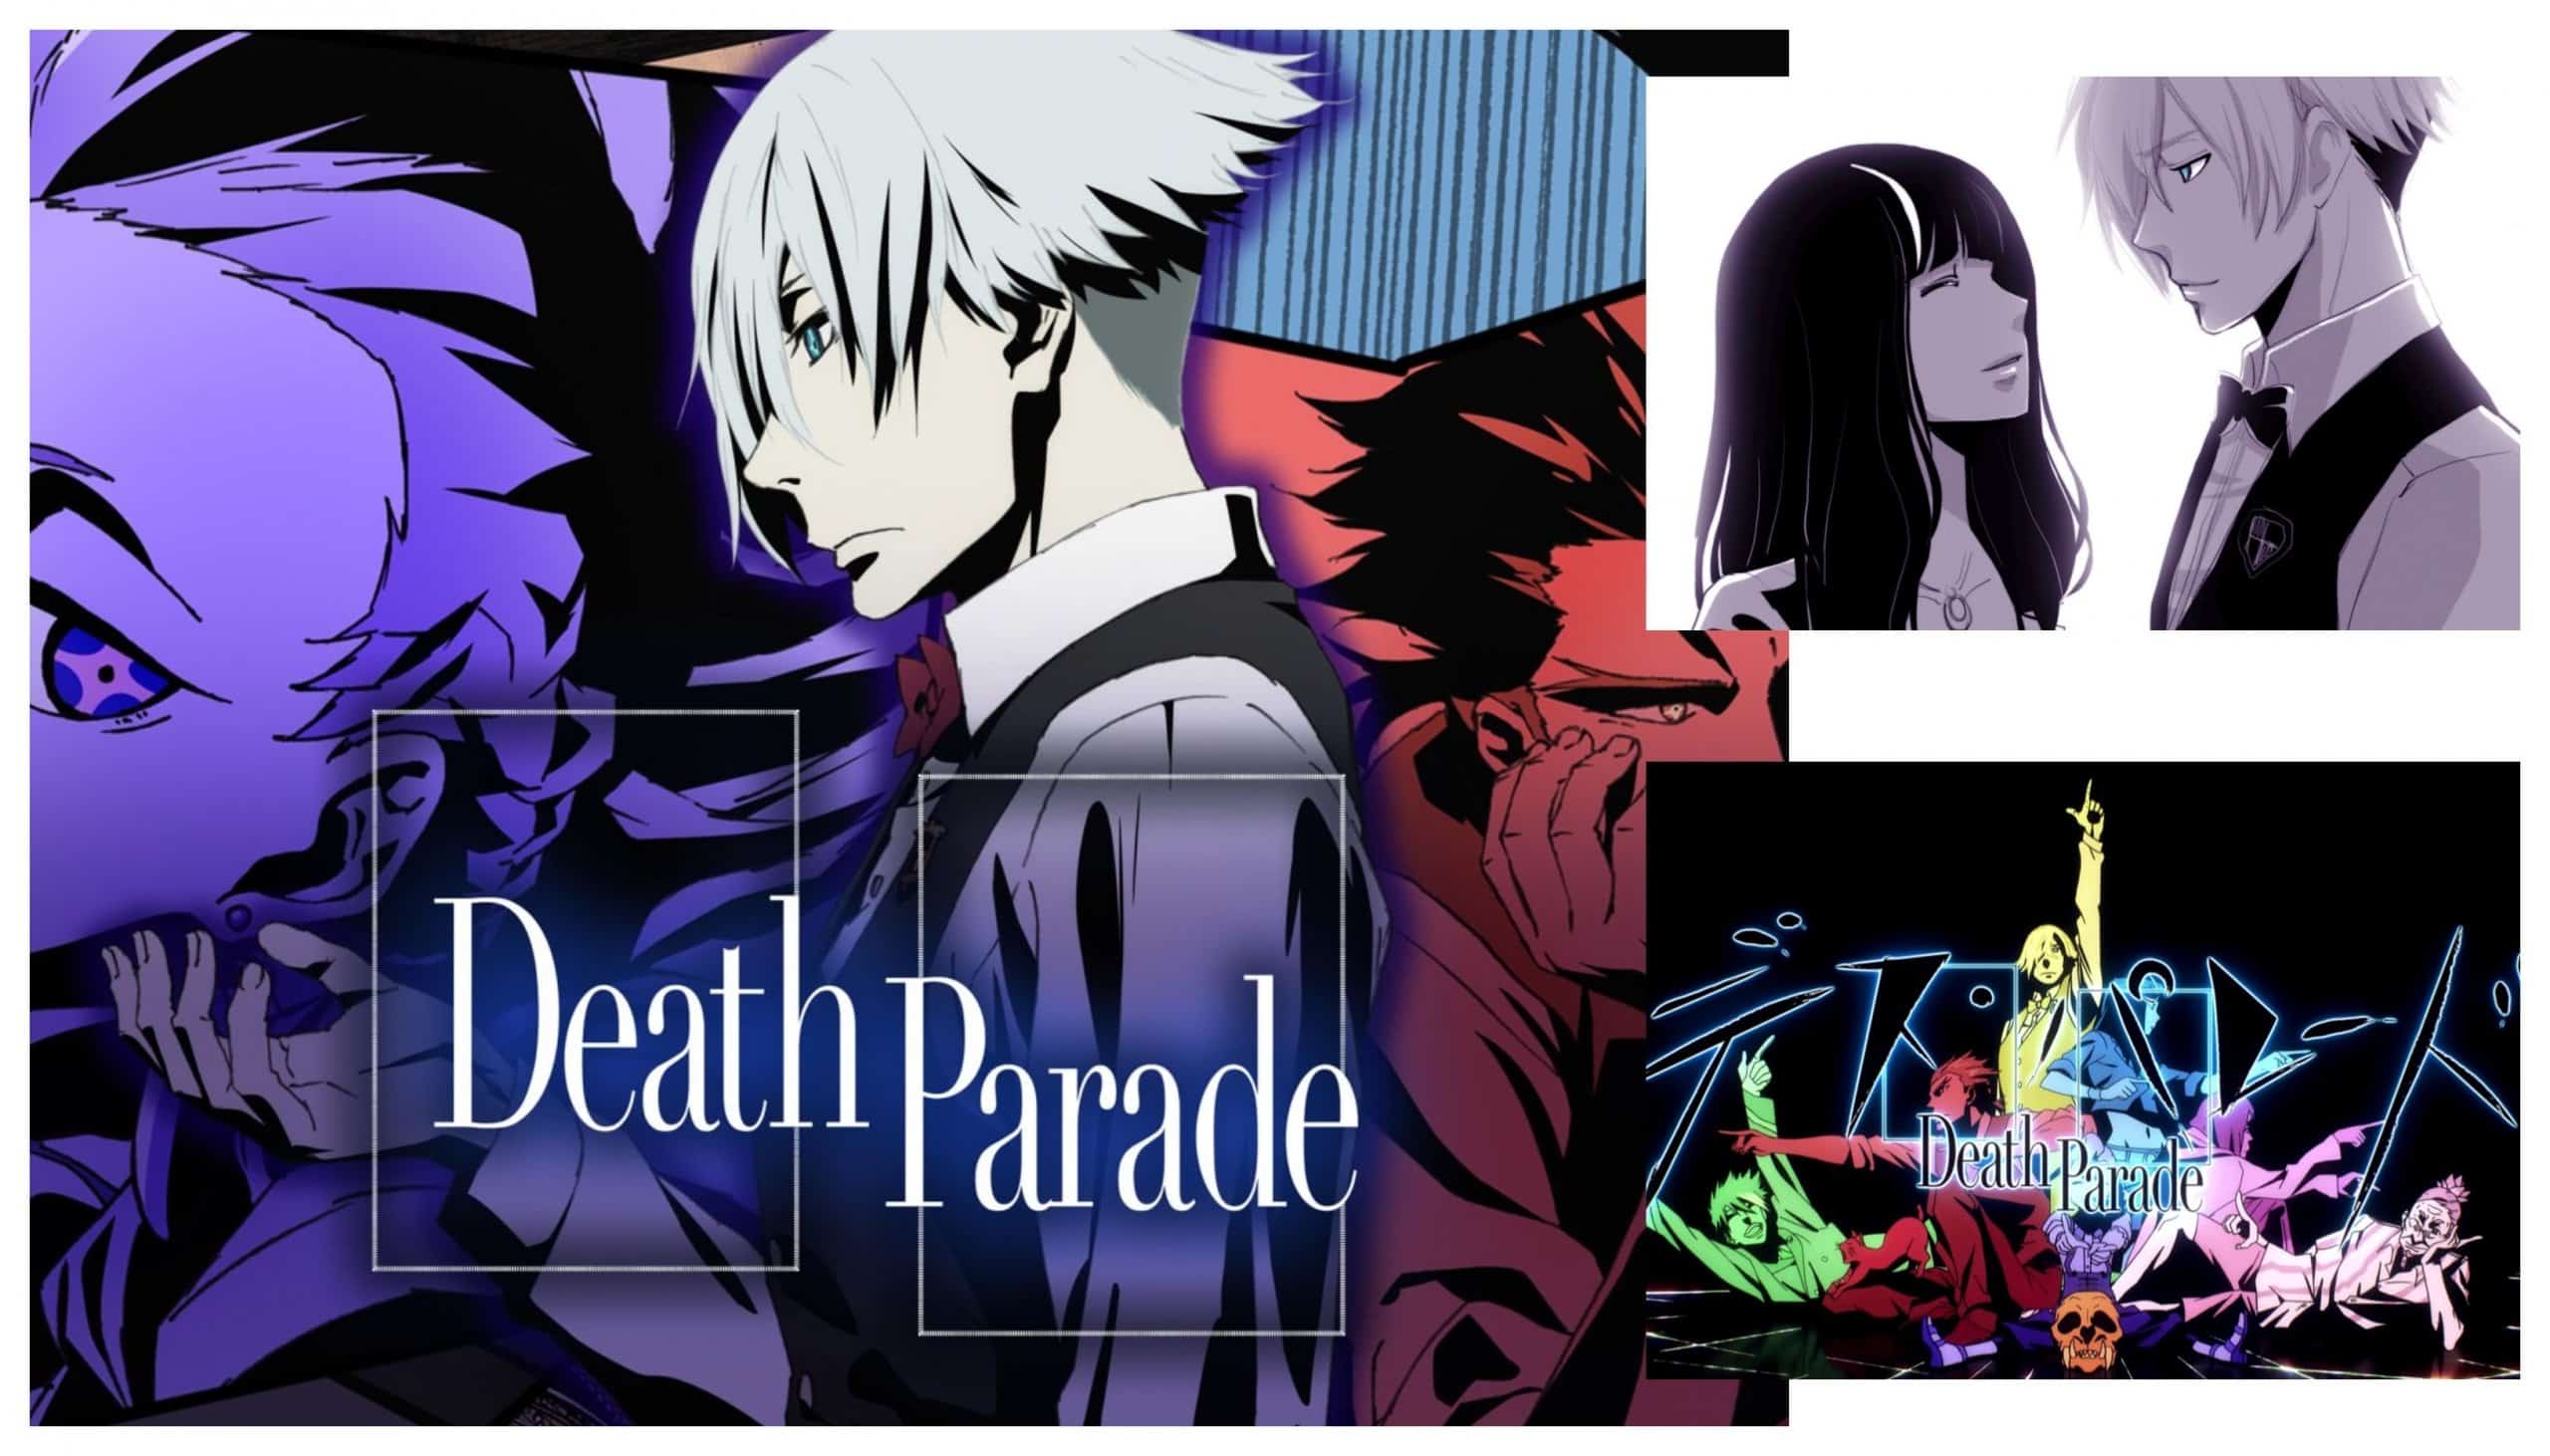 Japanese Death Games Poster Anime Terror Resonance Home Decor Poster Wall  Art Hanging Picture Print Bedroom Decorative Painting Poster Room Aesthetic  50x75cm : Amazon.de: Home & Kitchen